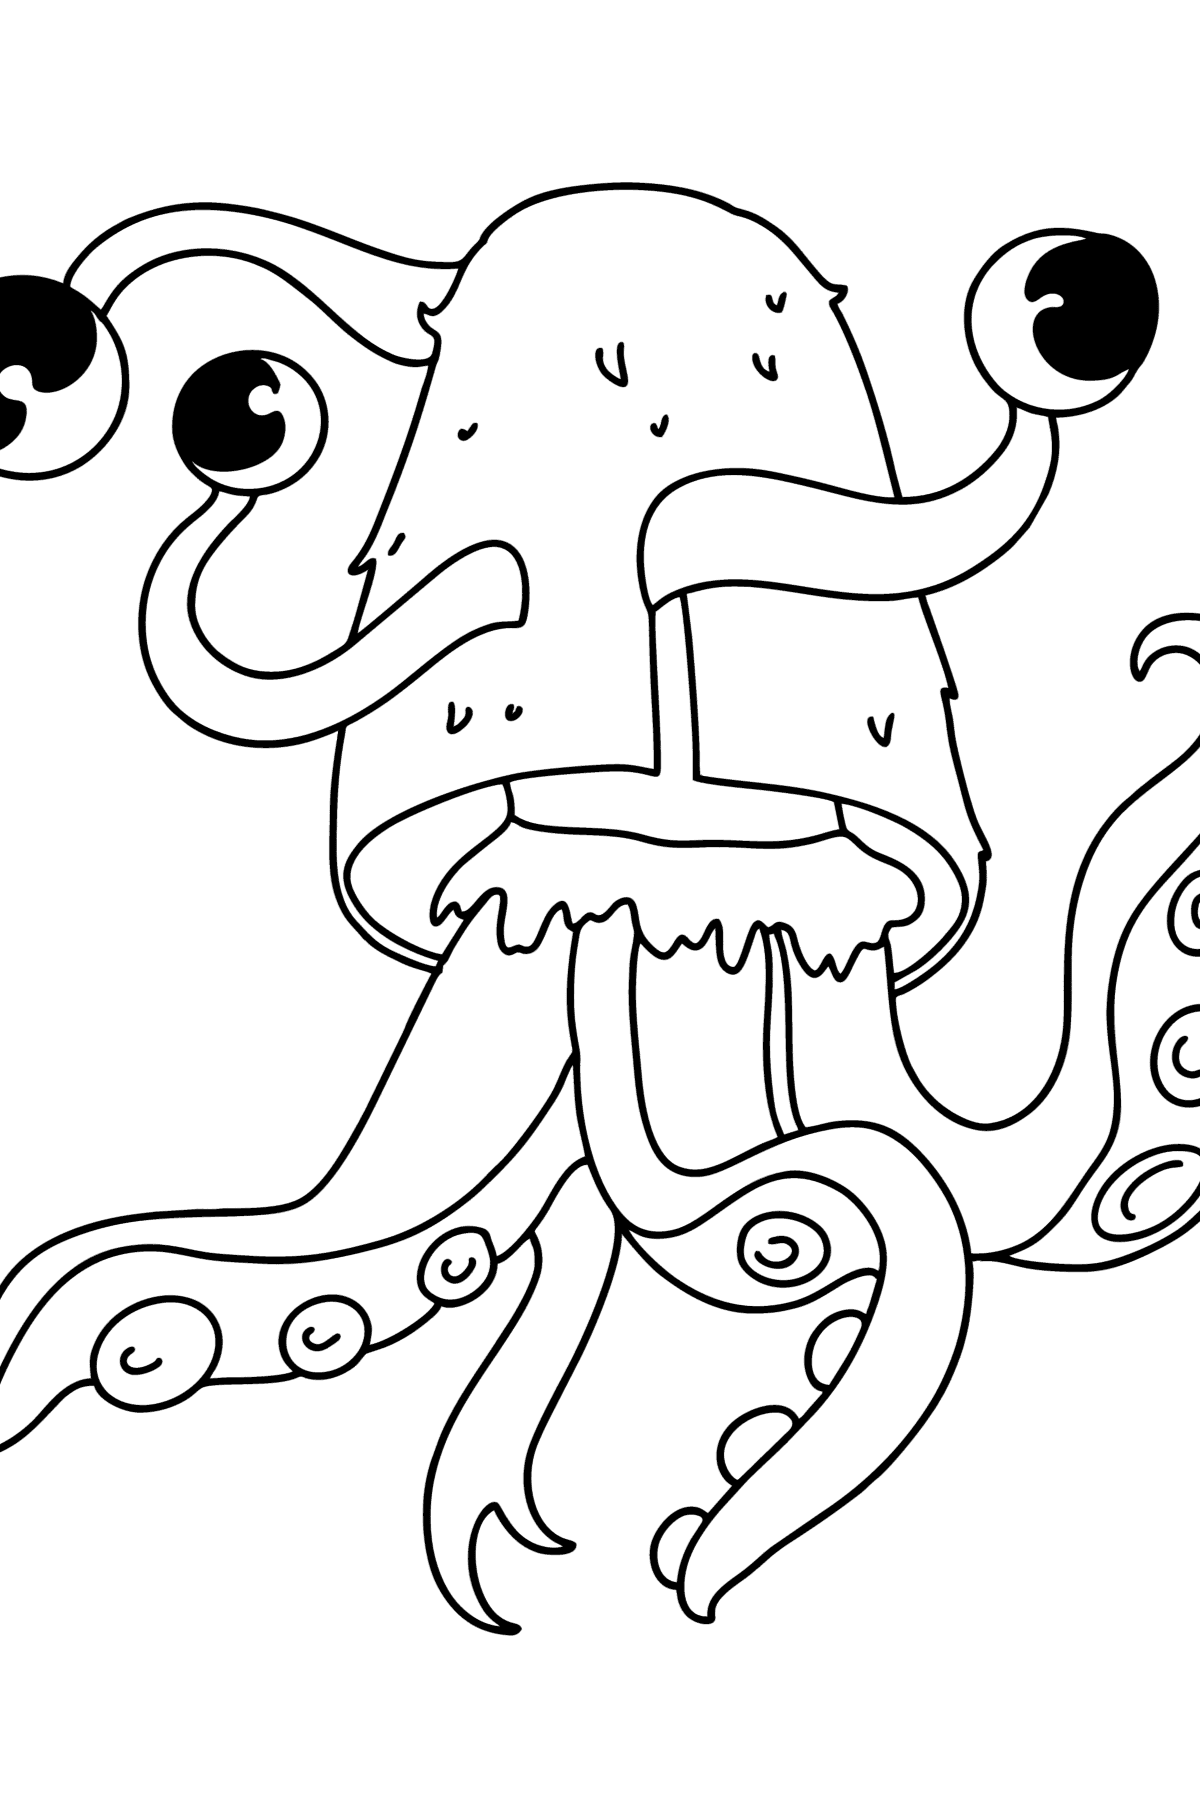 Monster Alien coloring page - Coloring Pages for Kids